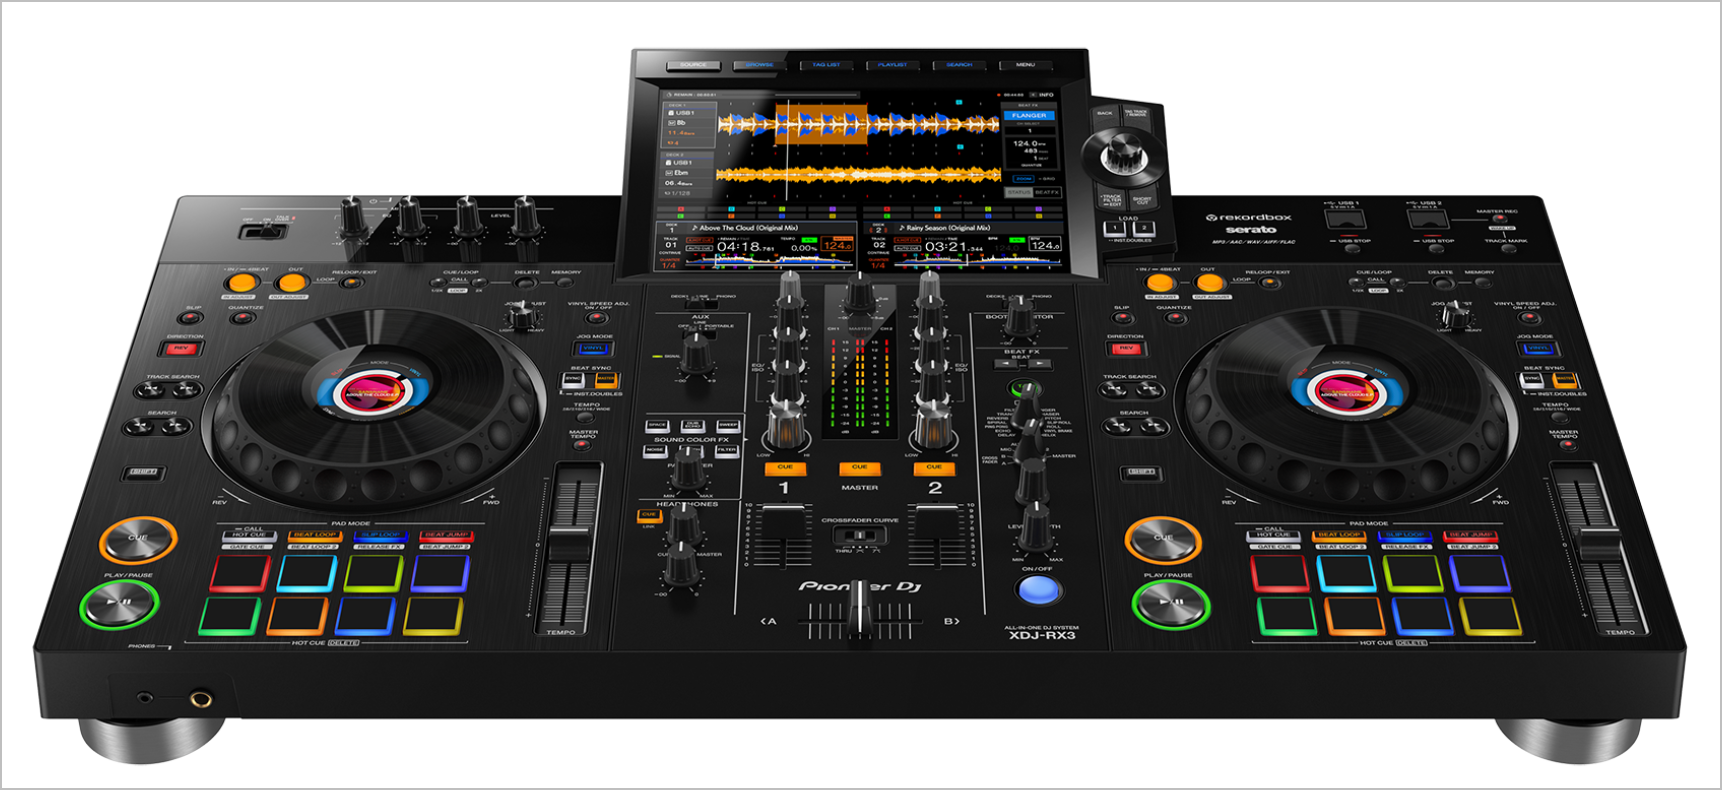 A sophisticated all-in-one DJ controller